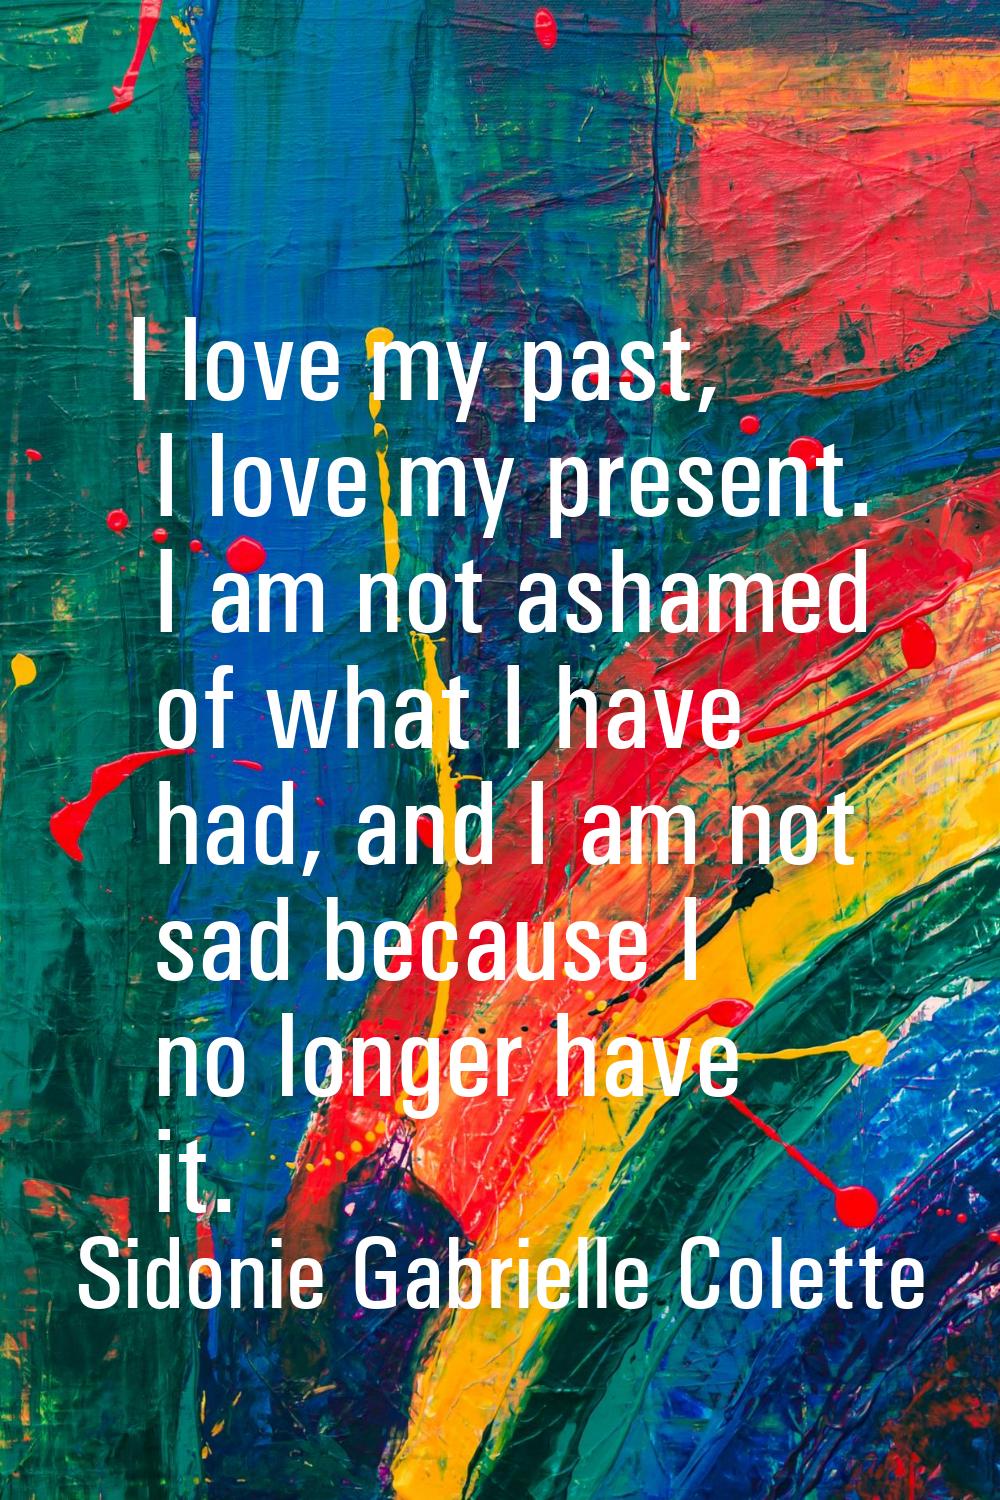 I love my past, I love my present. I am not ashamed of what I have had, and I am not sad because I 